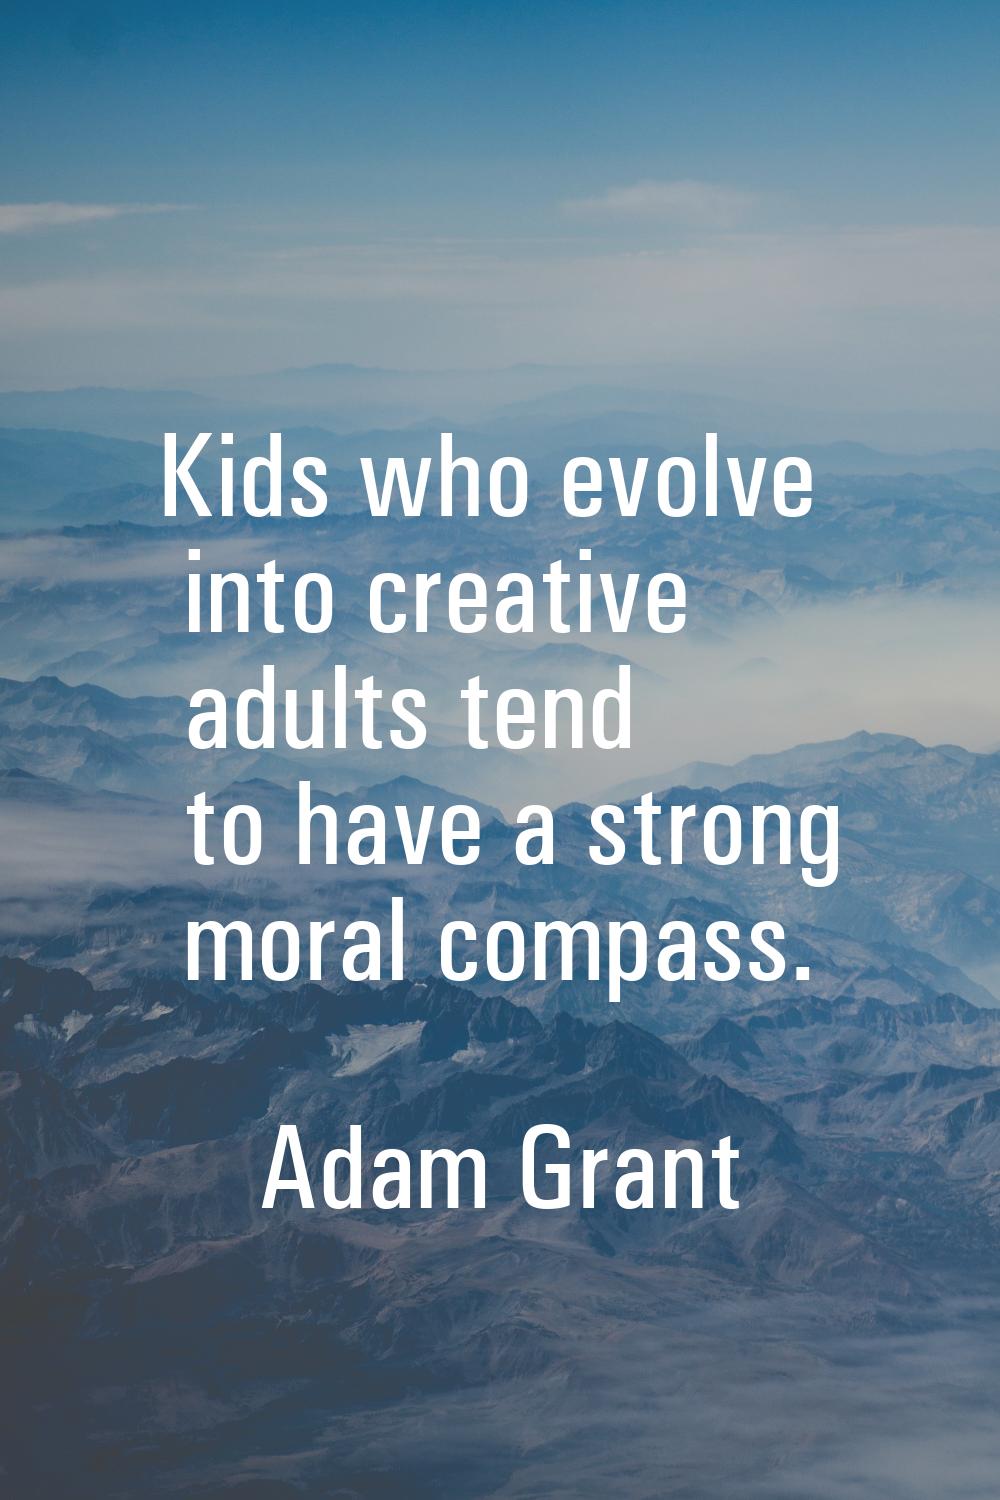 Kids who evolve into creative adults tend to have a strong moral compass.